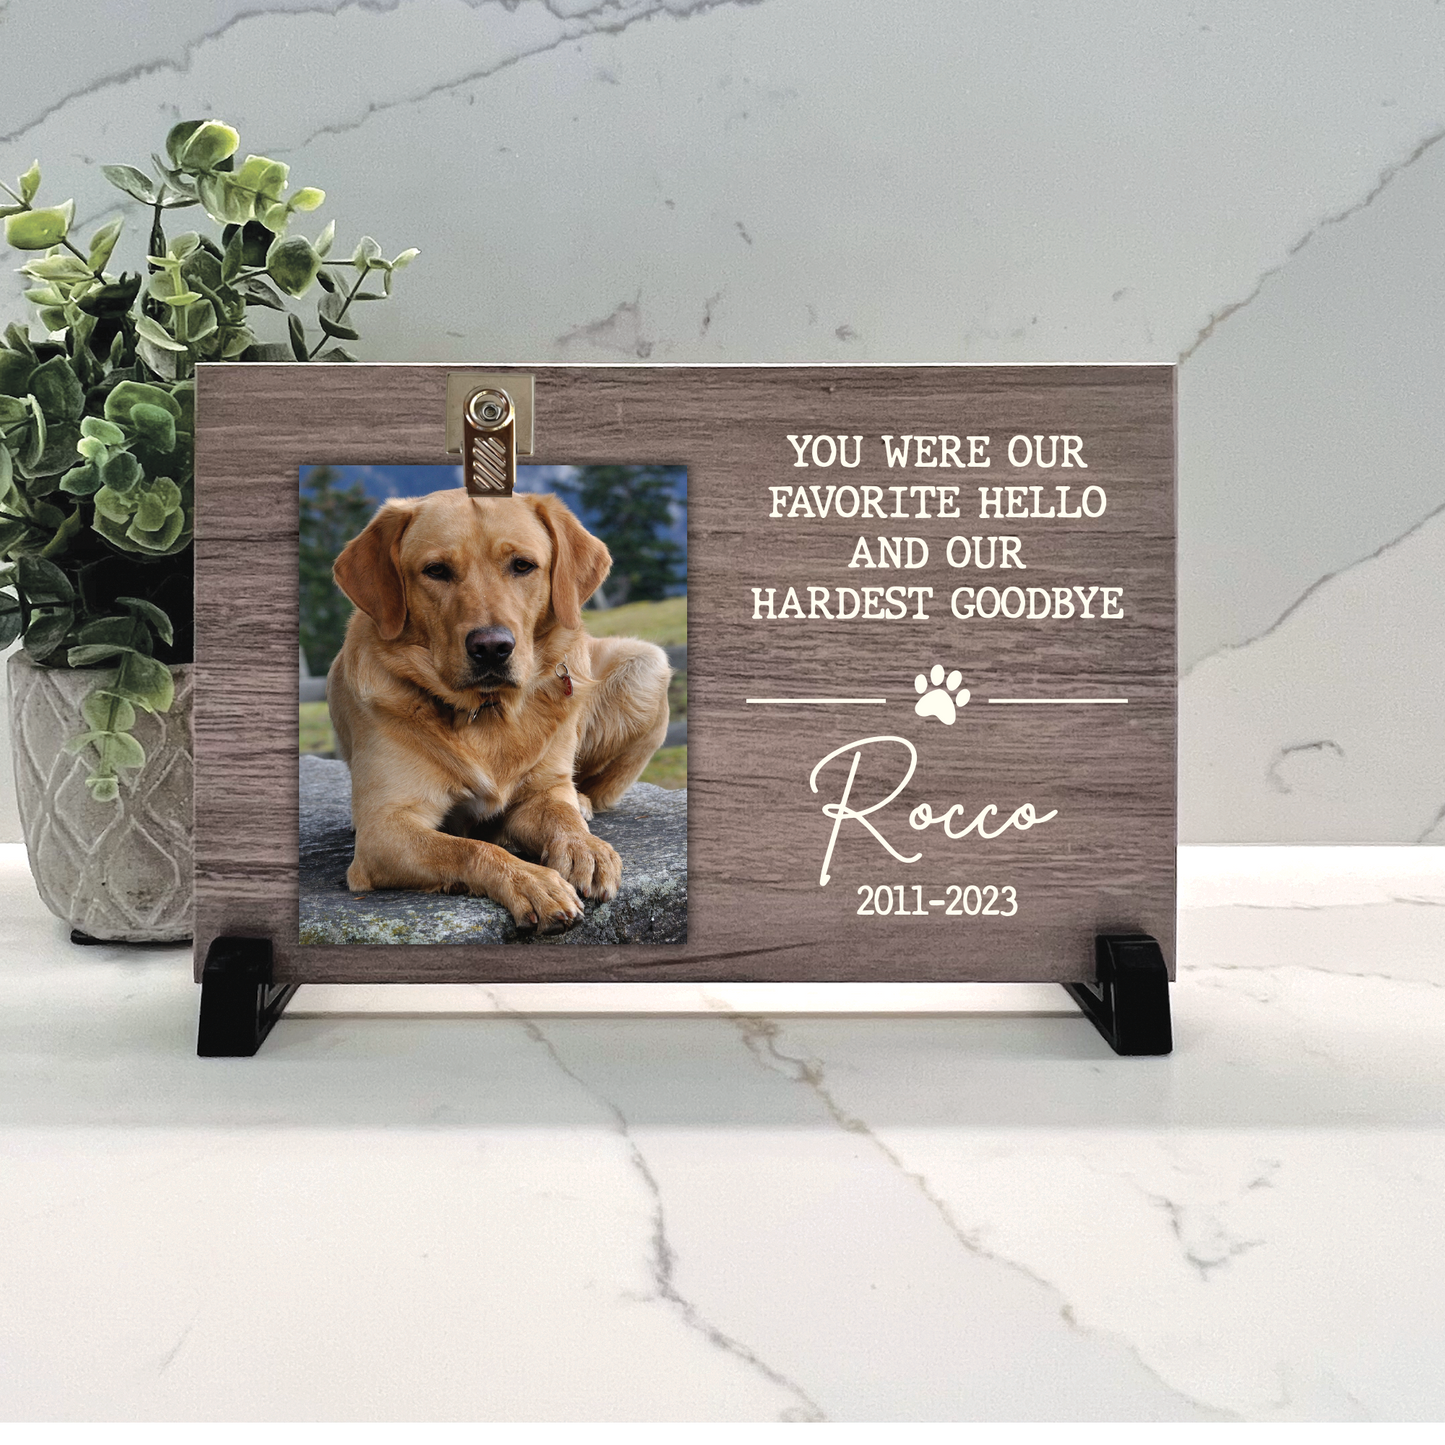 Dog Memorial Frame - You were our favorite hello and our hardest goodbye